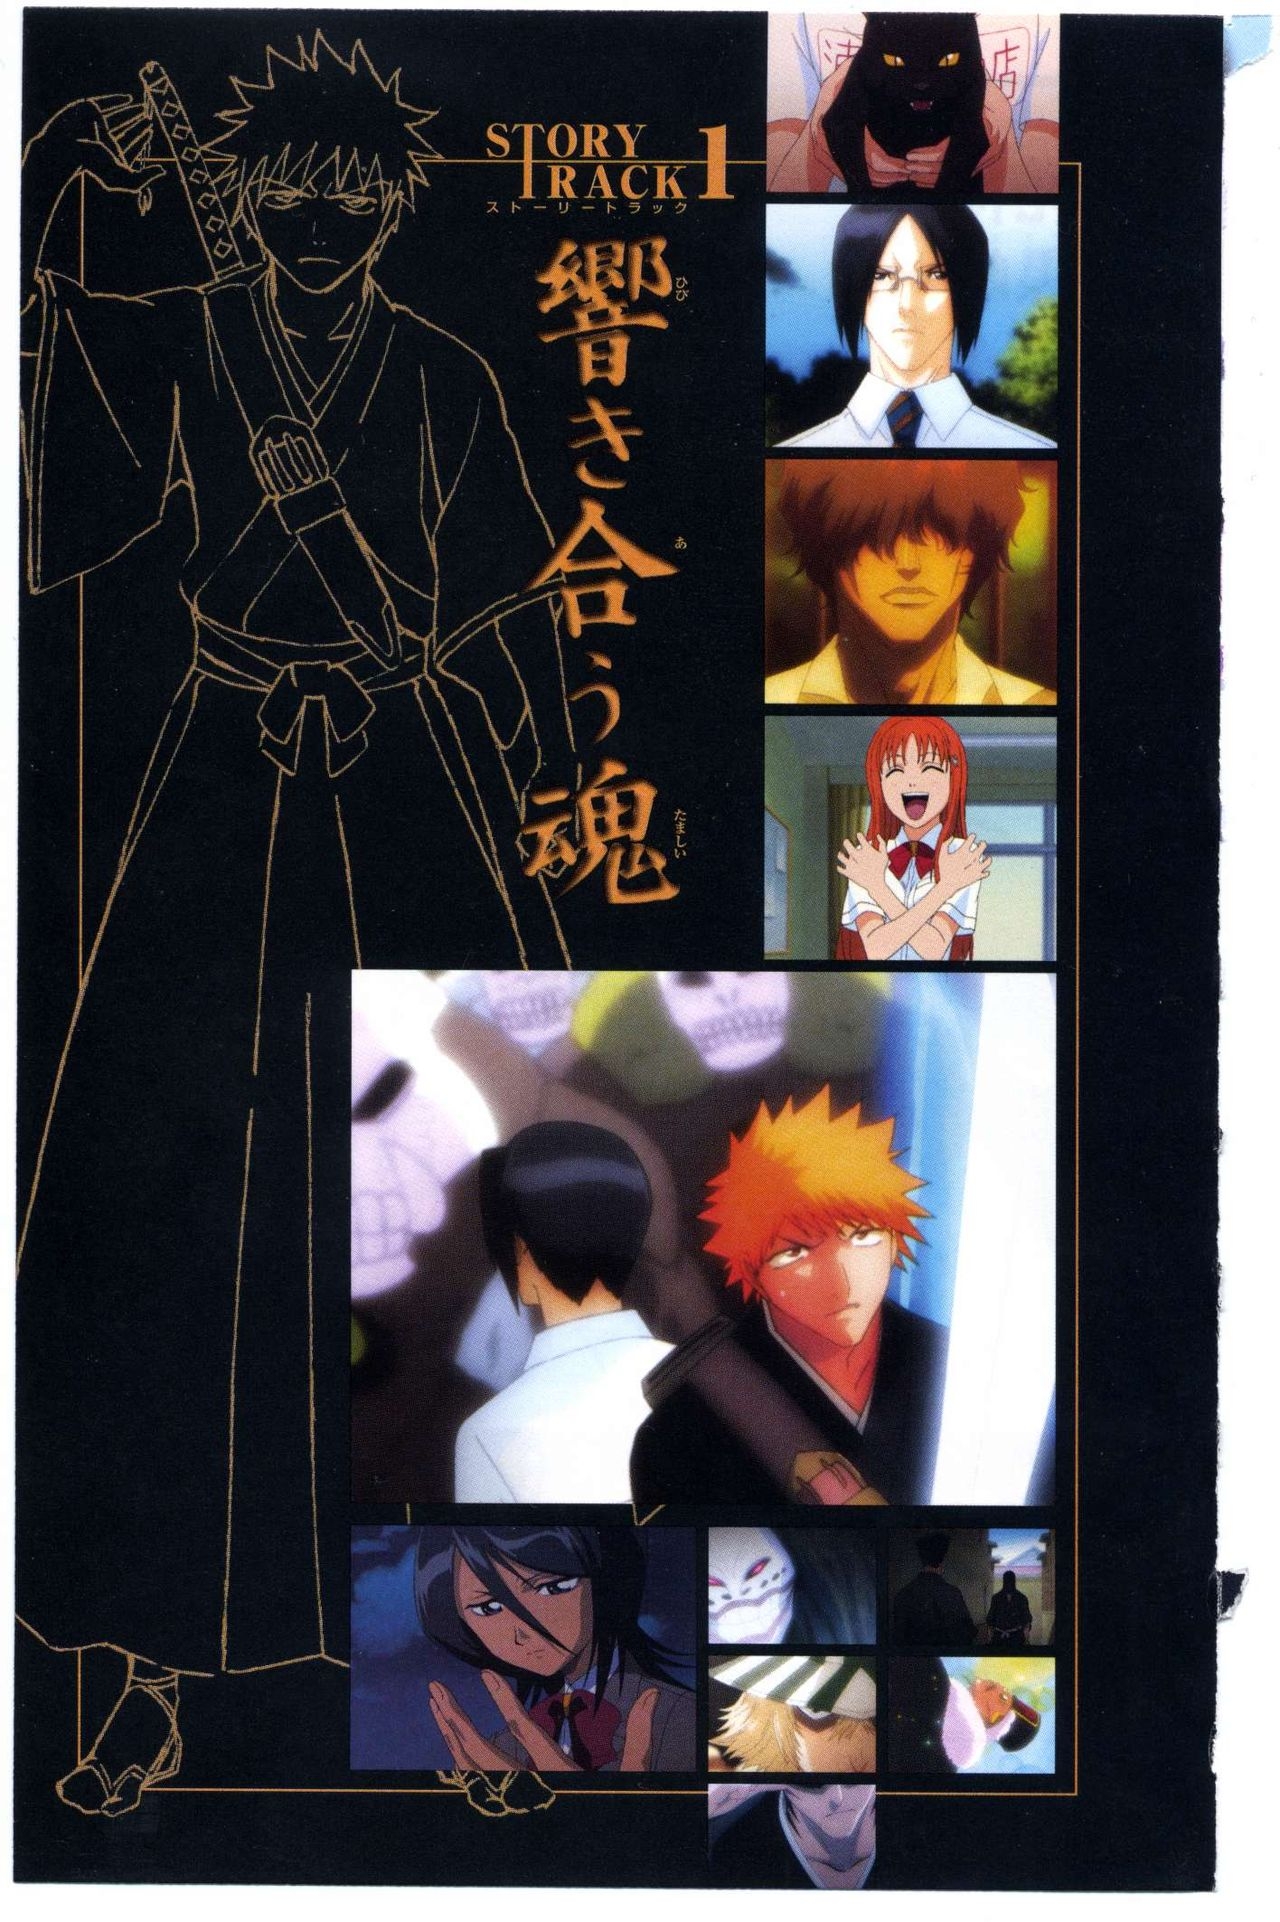 Bleach: Official Animation Book VIBEs 29